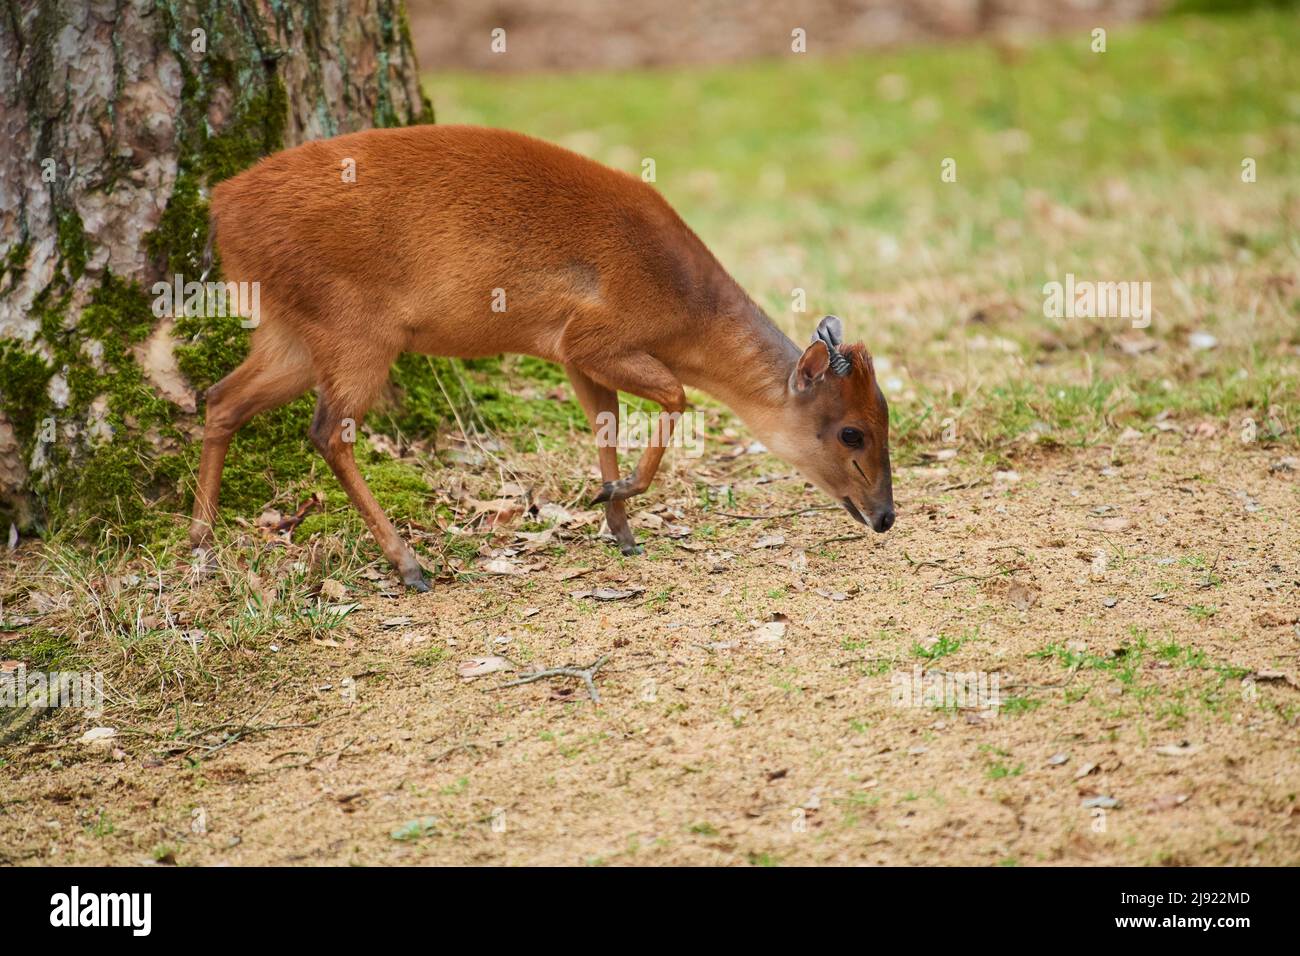 Red forest duiker (Cephalophus natalensis) on a meadow, Bavaria, Germany Stock Photo